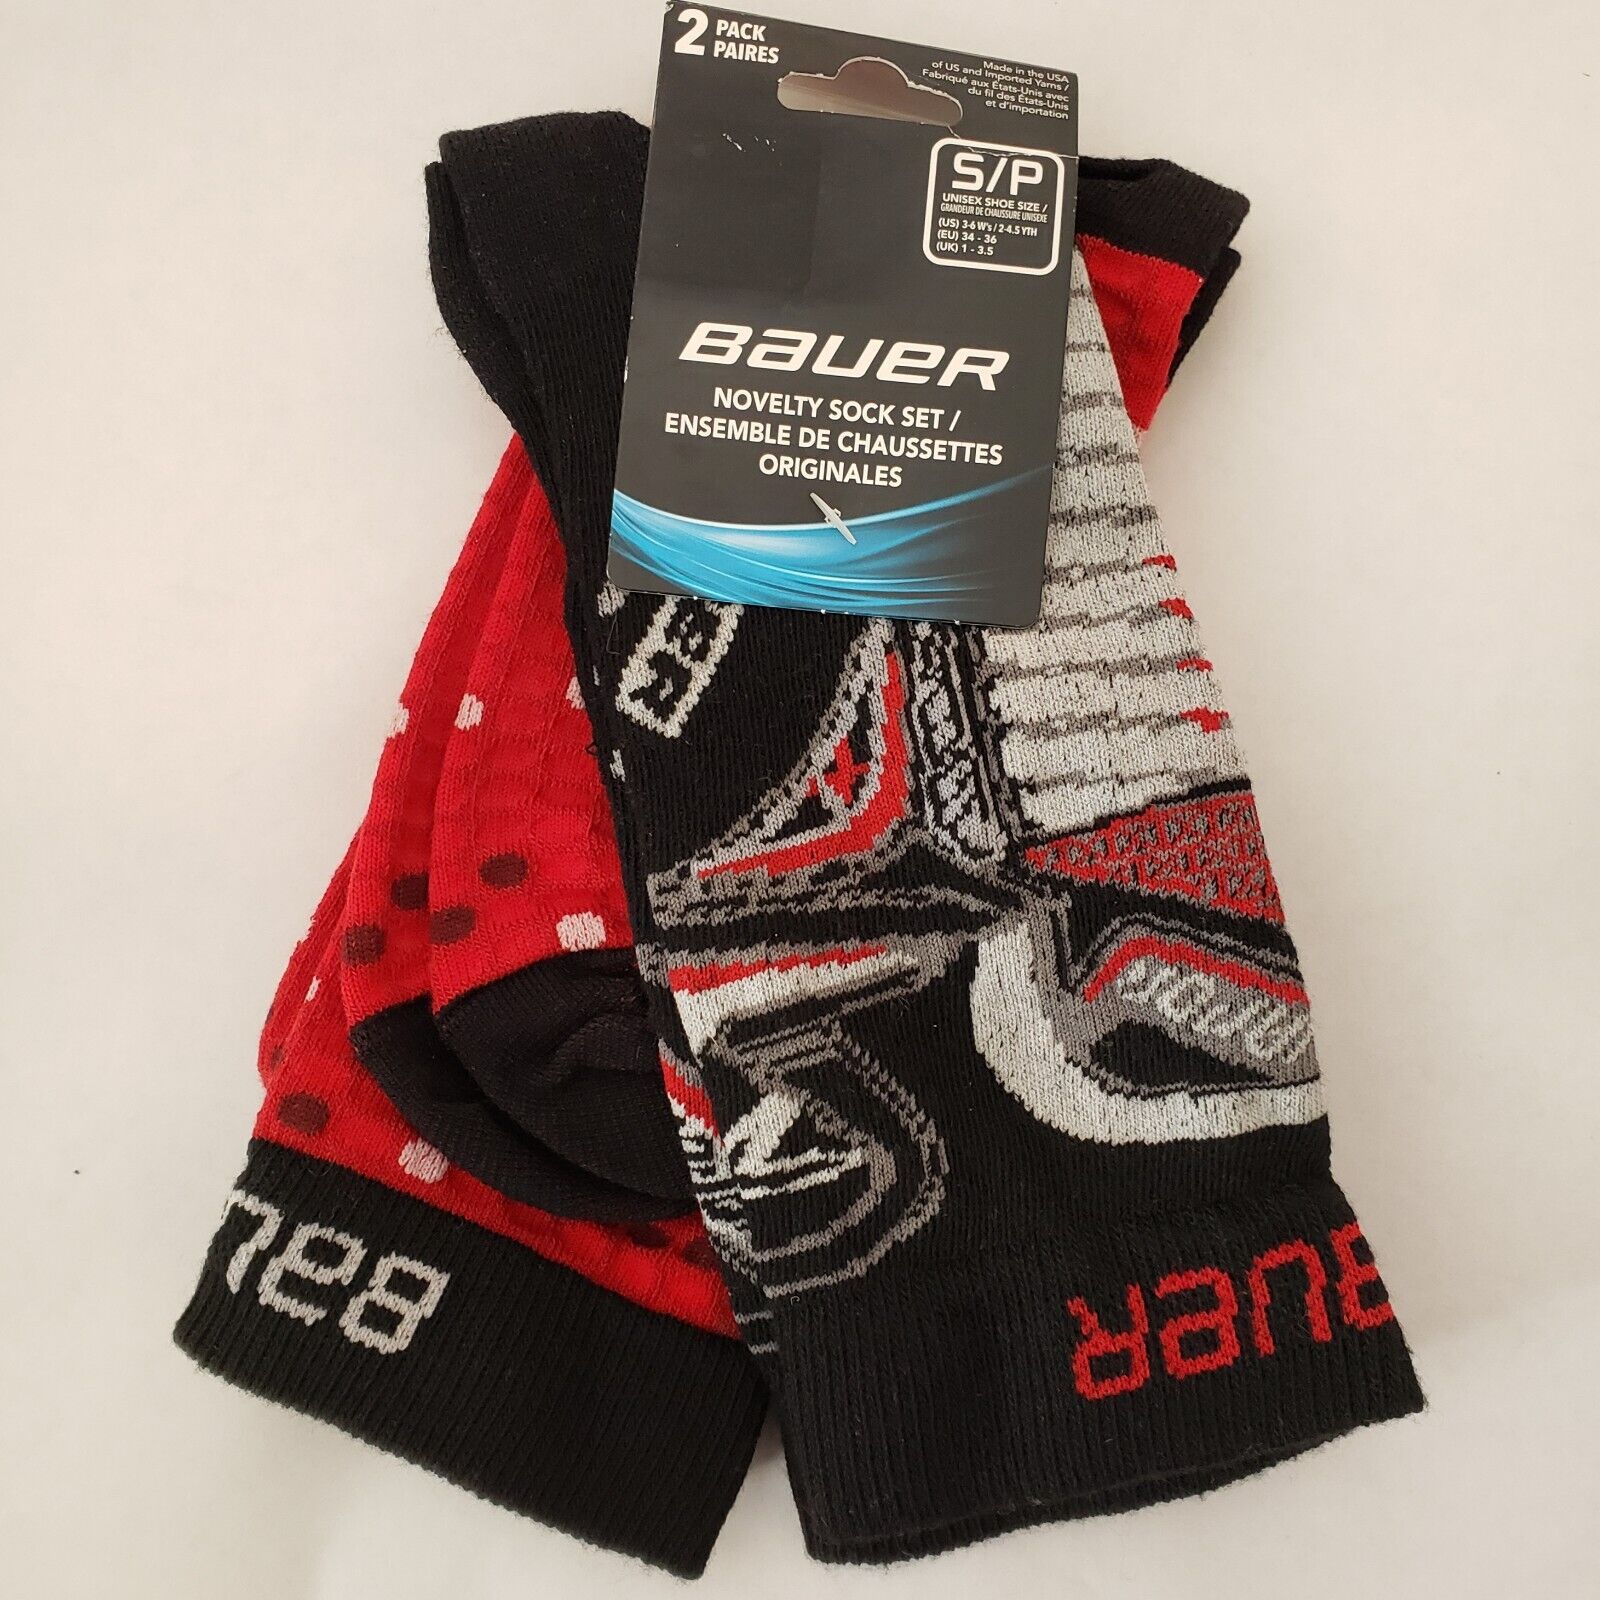 Bauer Novelty Holiday Socks Size S/p 2-4.5 Yth Mid-calf Light Compression 2 Pack